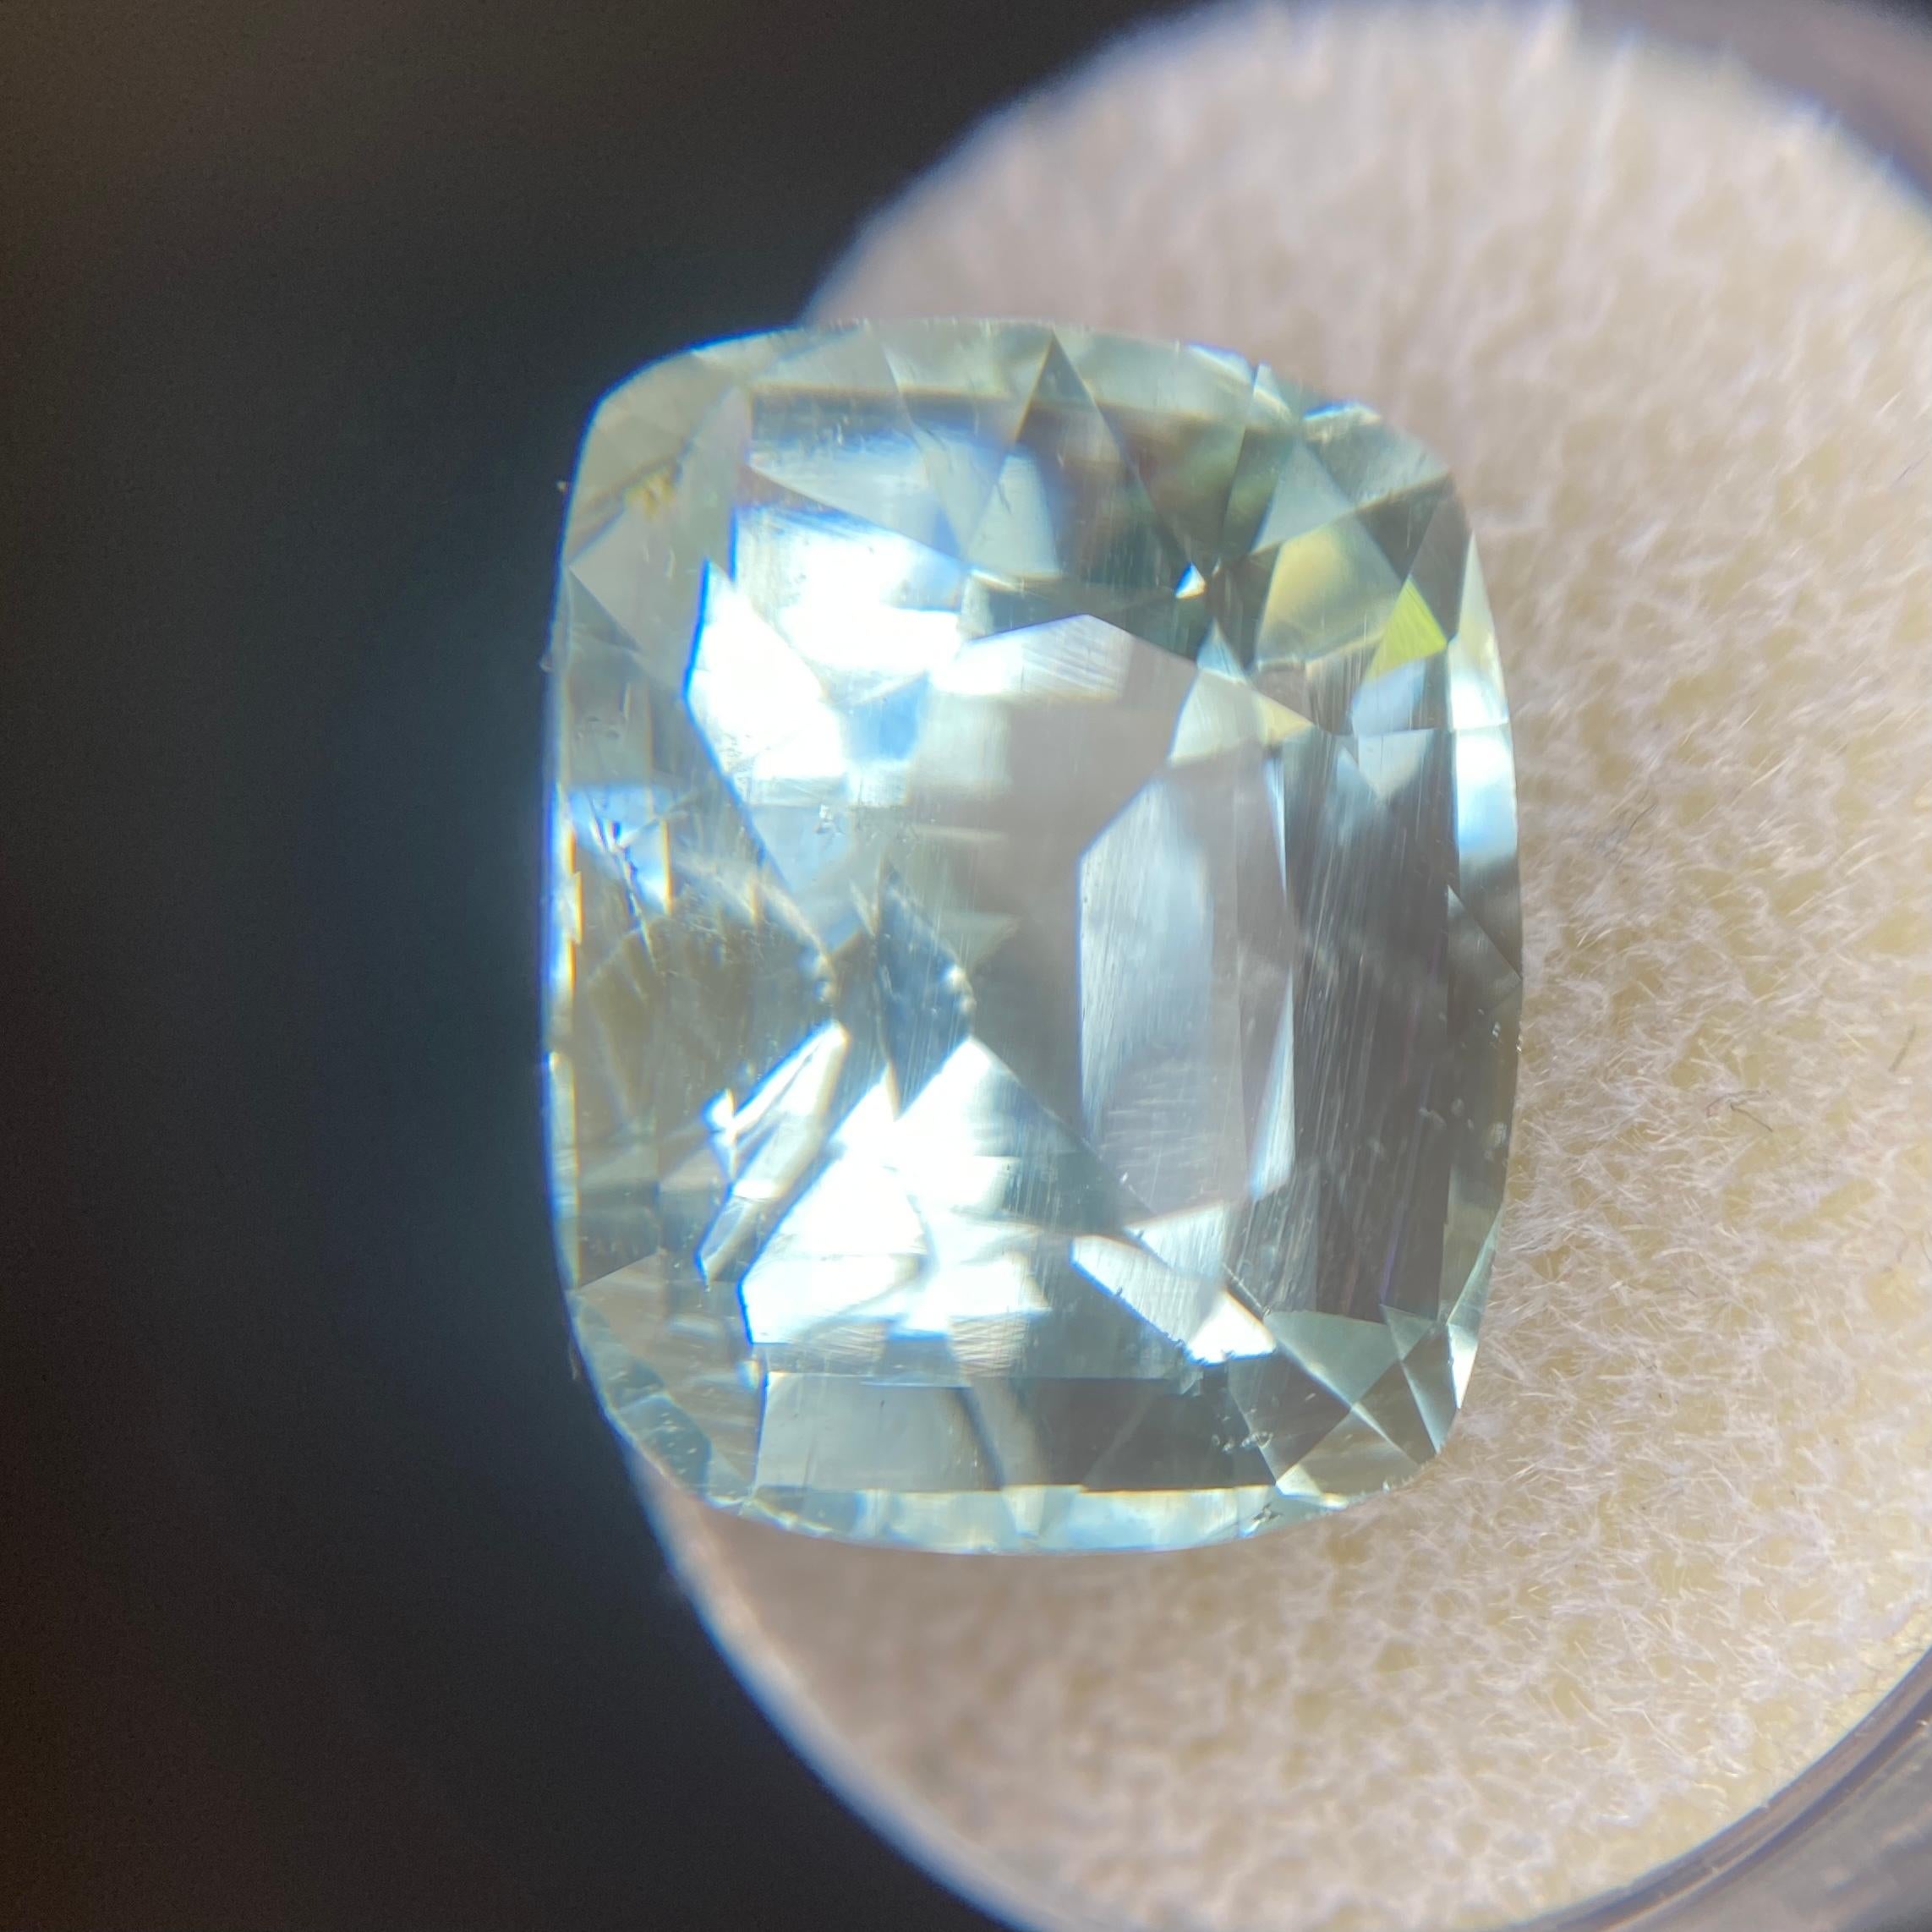 Natural Bright Blue Aquamarine Gemstone.

Large 14.10 Carat with a beautiful bright blue colour and excellent clarity. Very clean gem with only some small natural inclusions visible.

Also has a very good cushion cut with ideal polish to show great